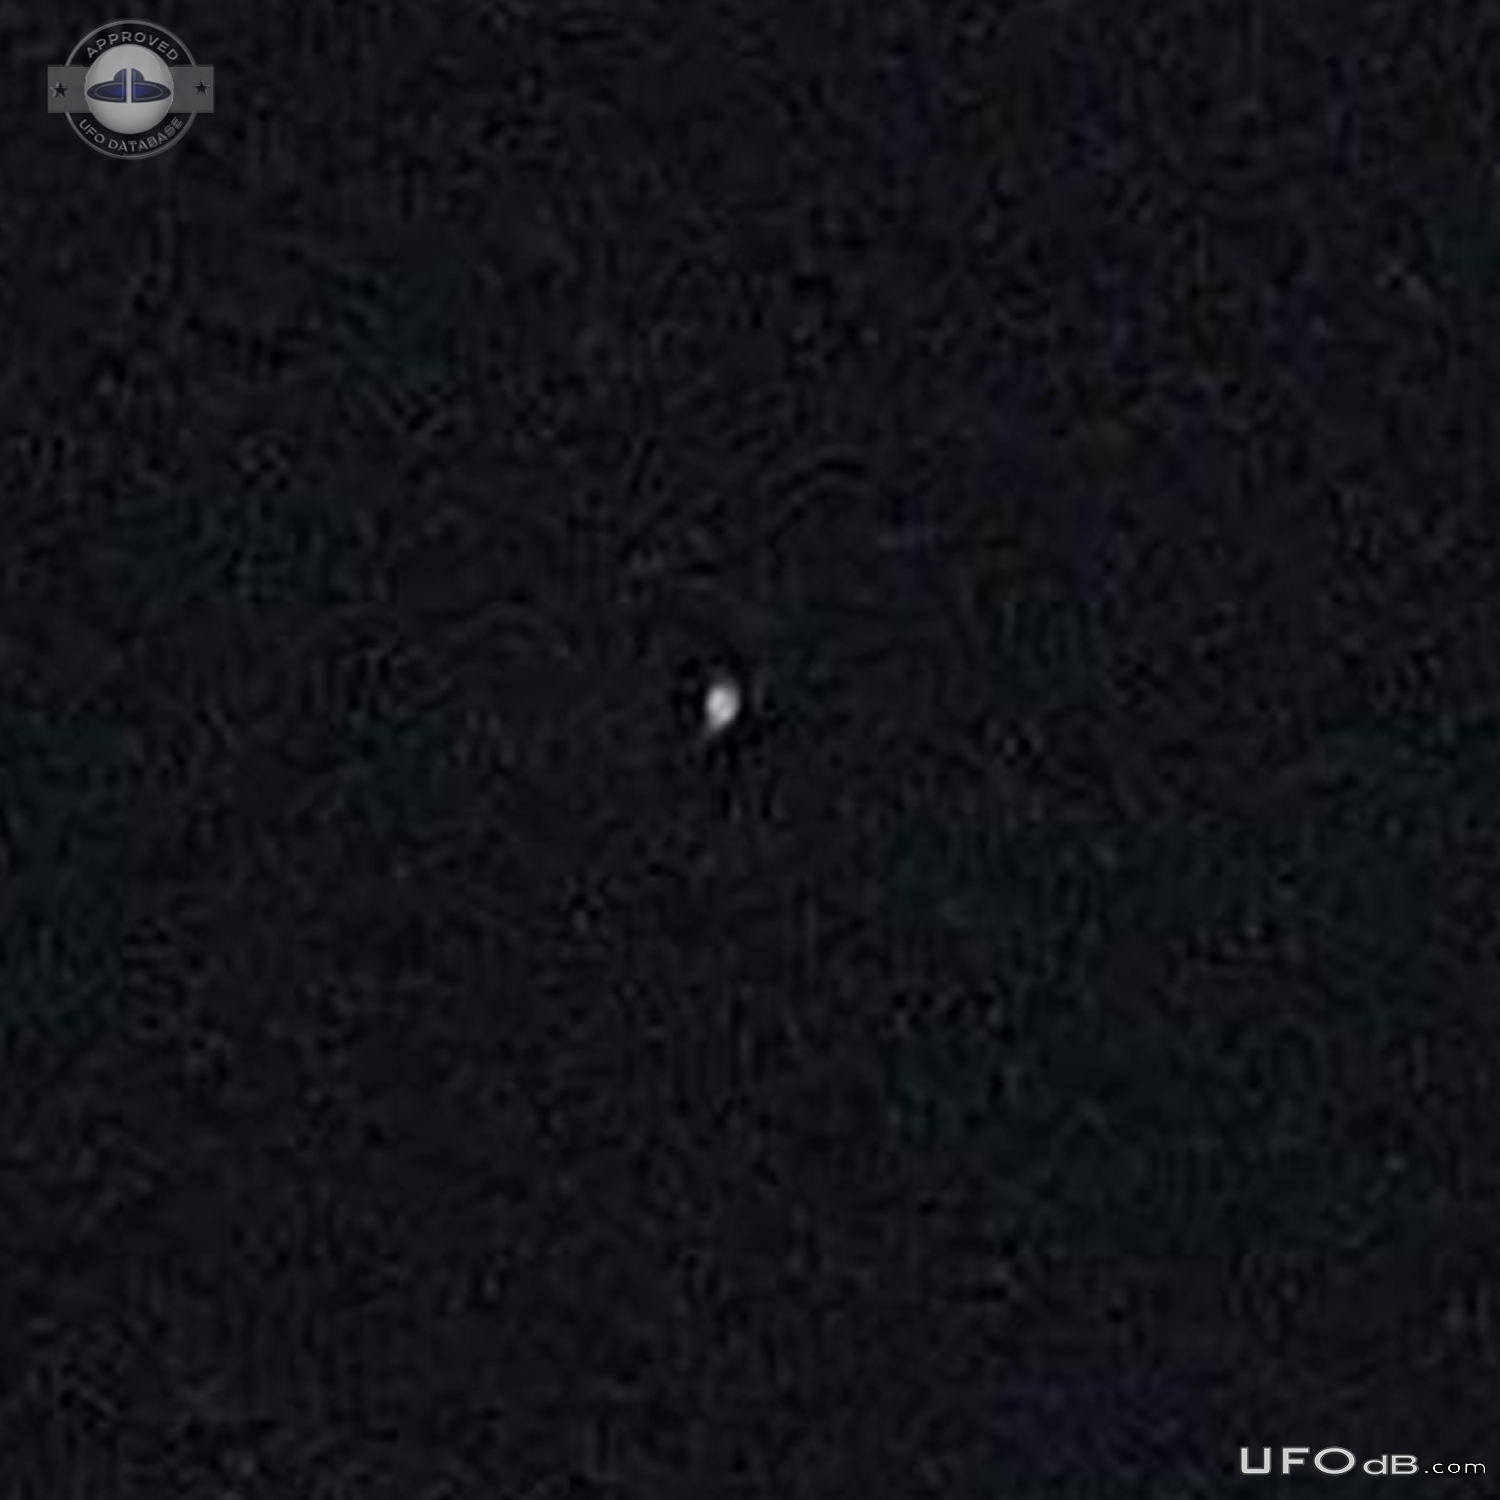 Bright UFO moved fast - like a star but moved - Tucson Arizona USA 201 UFO Picture #798-4